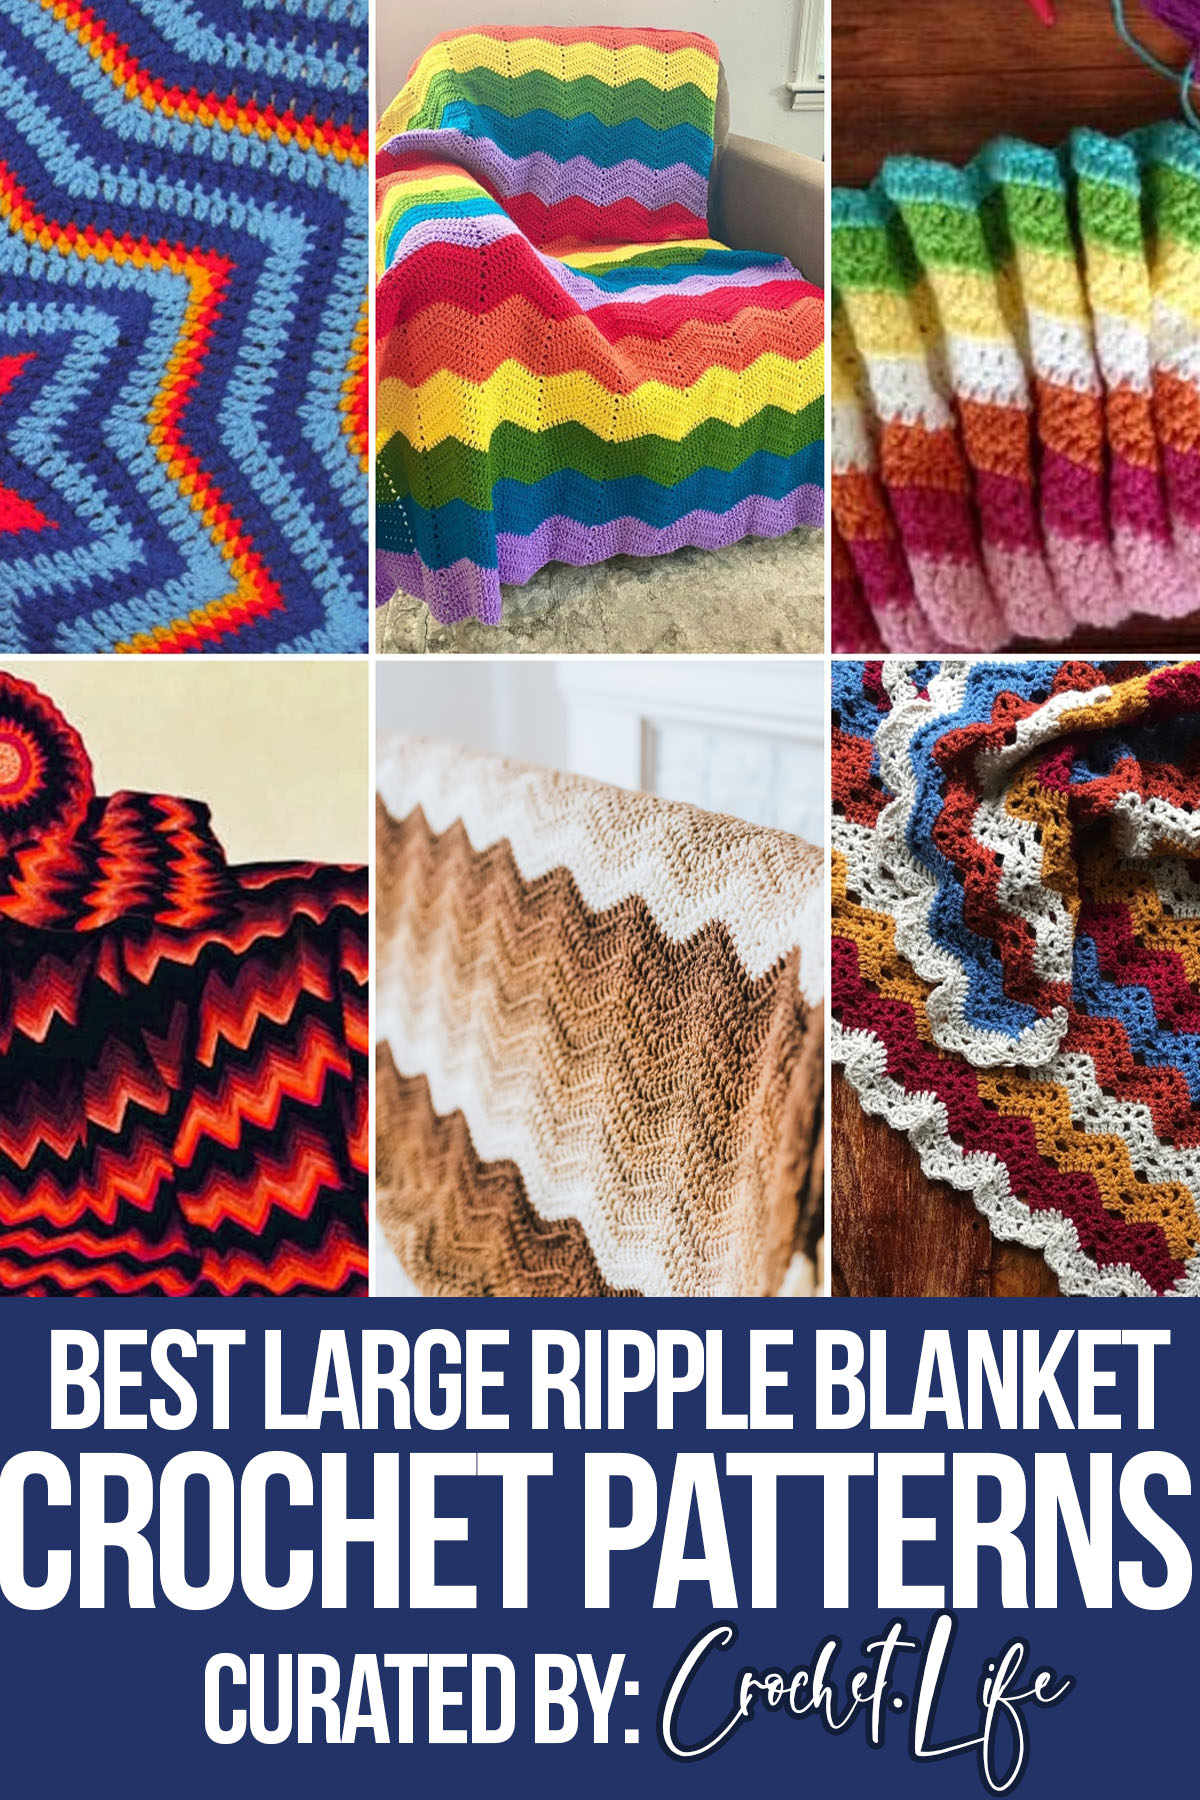 photo collage of large crochet ripple blanket patterns with text which reads best large ripple blanket crochet patterns curated by crochet.life